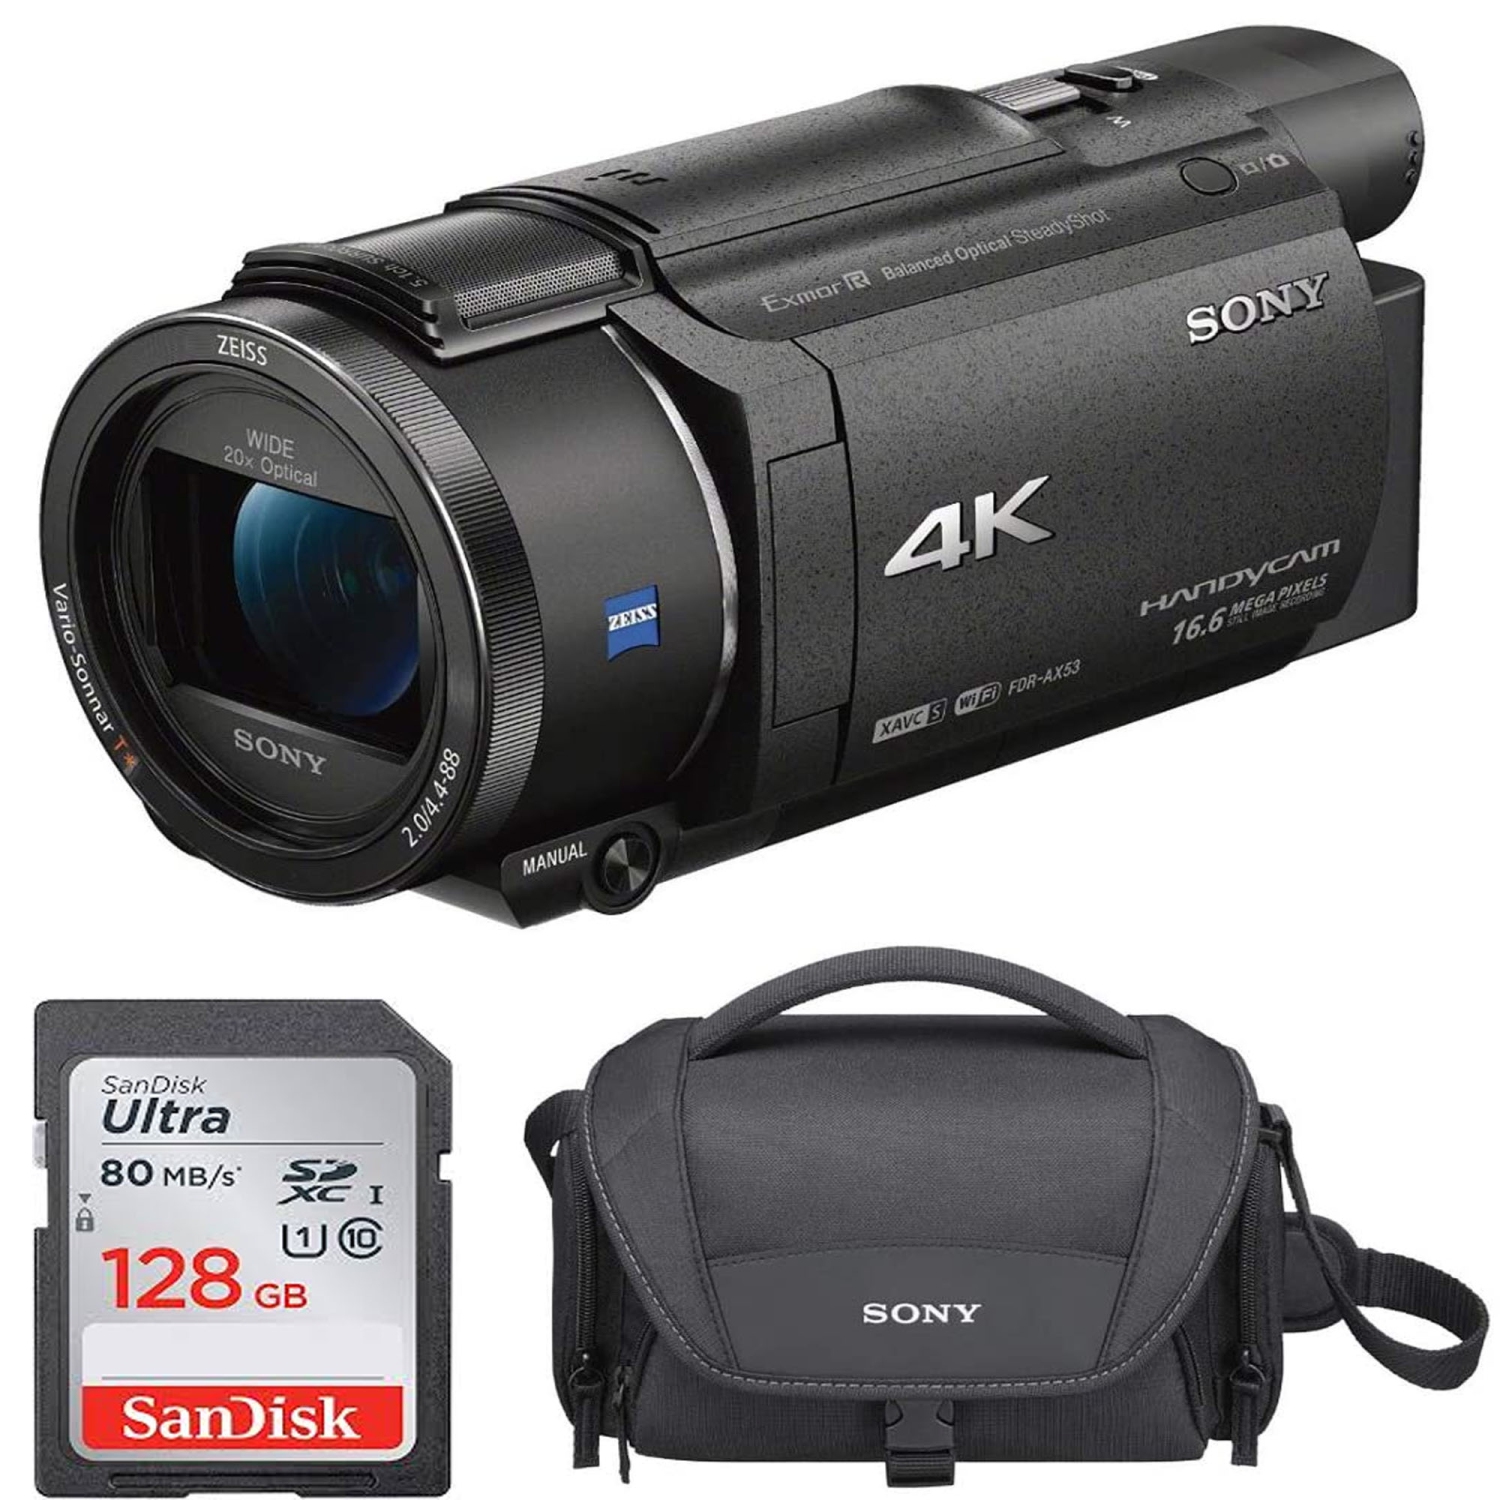 Sony FDR-AX53 4K Ultra HD Handycam Camcorder with 128GB Card and Case Bundle - US Version w/ Seller Warranty